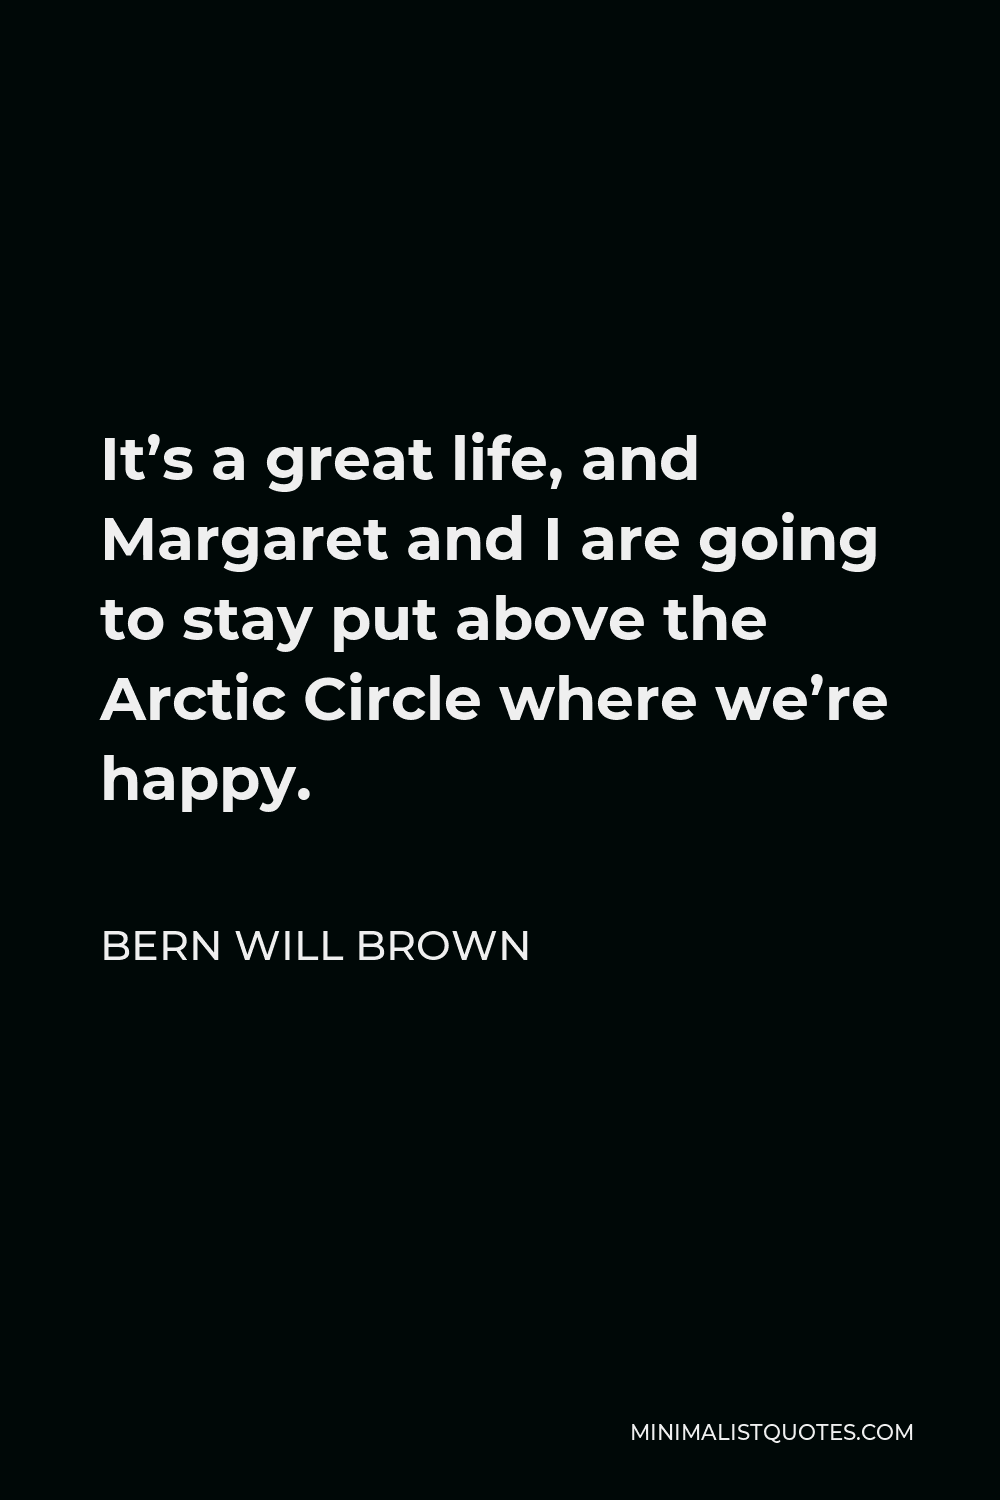 Bern Will Brown Quote - It’s a great life, and Margaret and I are going to stay put above the Arctic Circle where we’re happy.